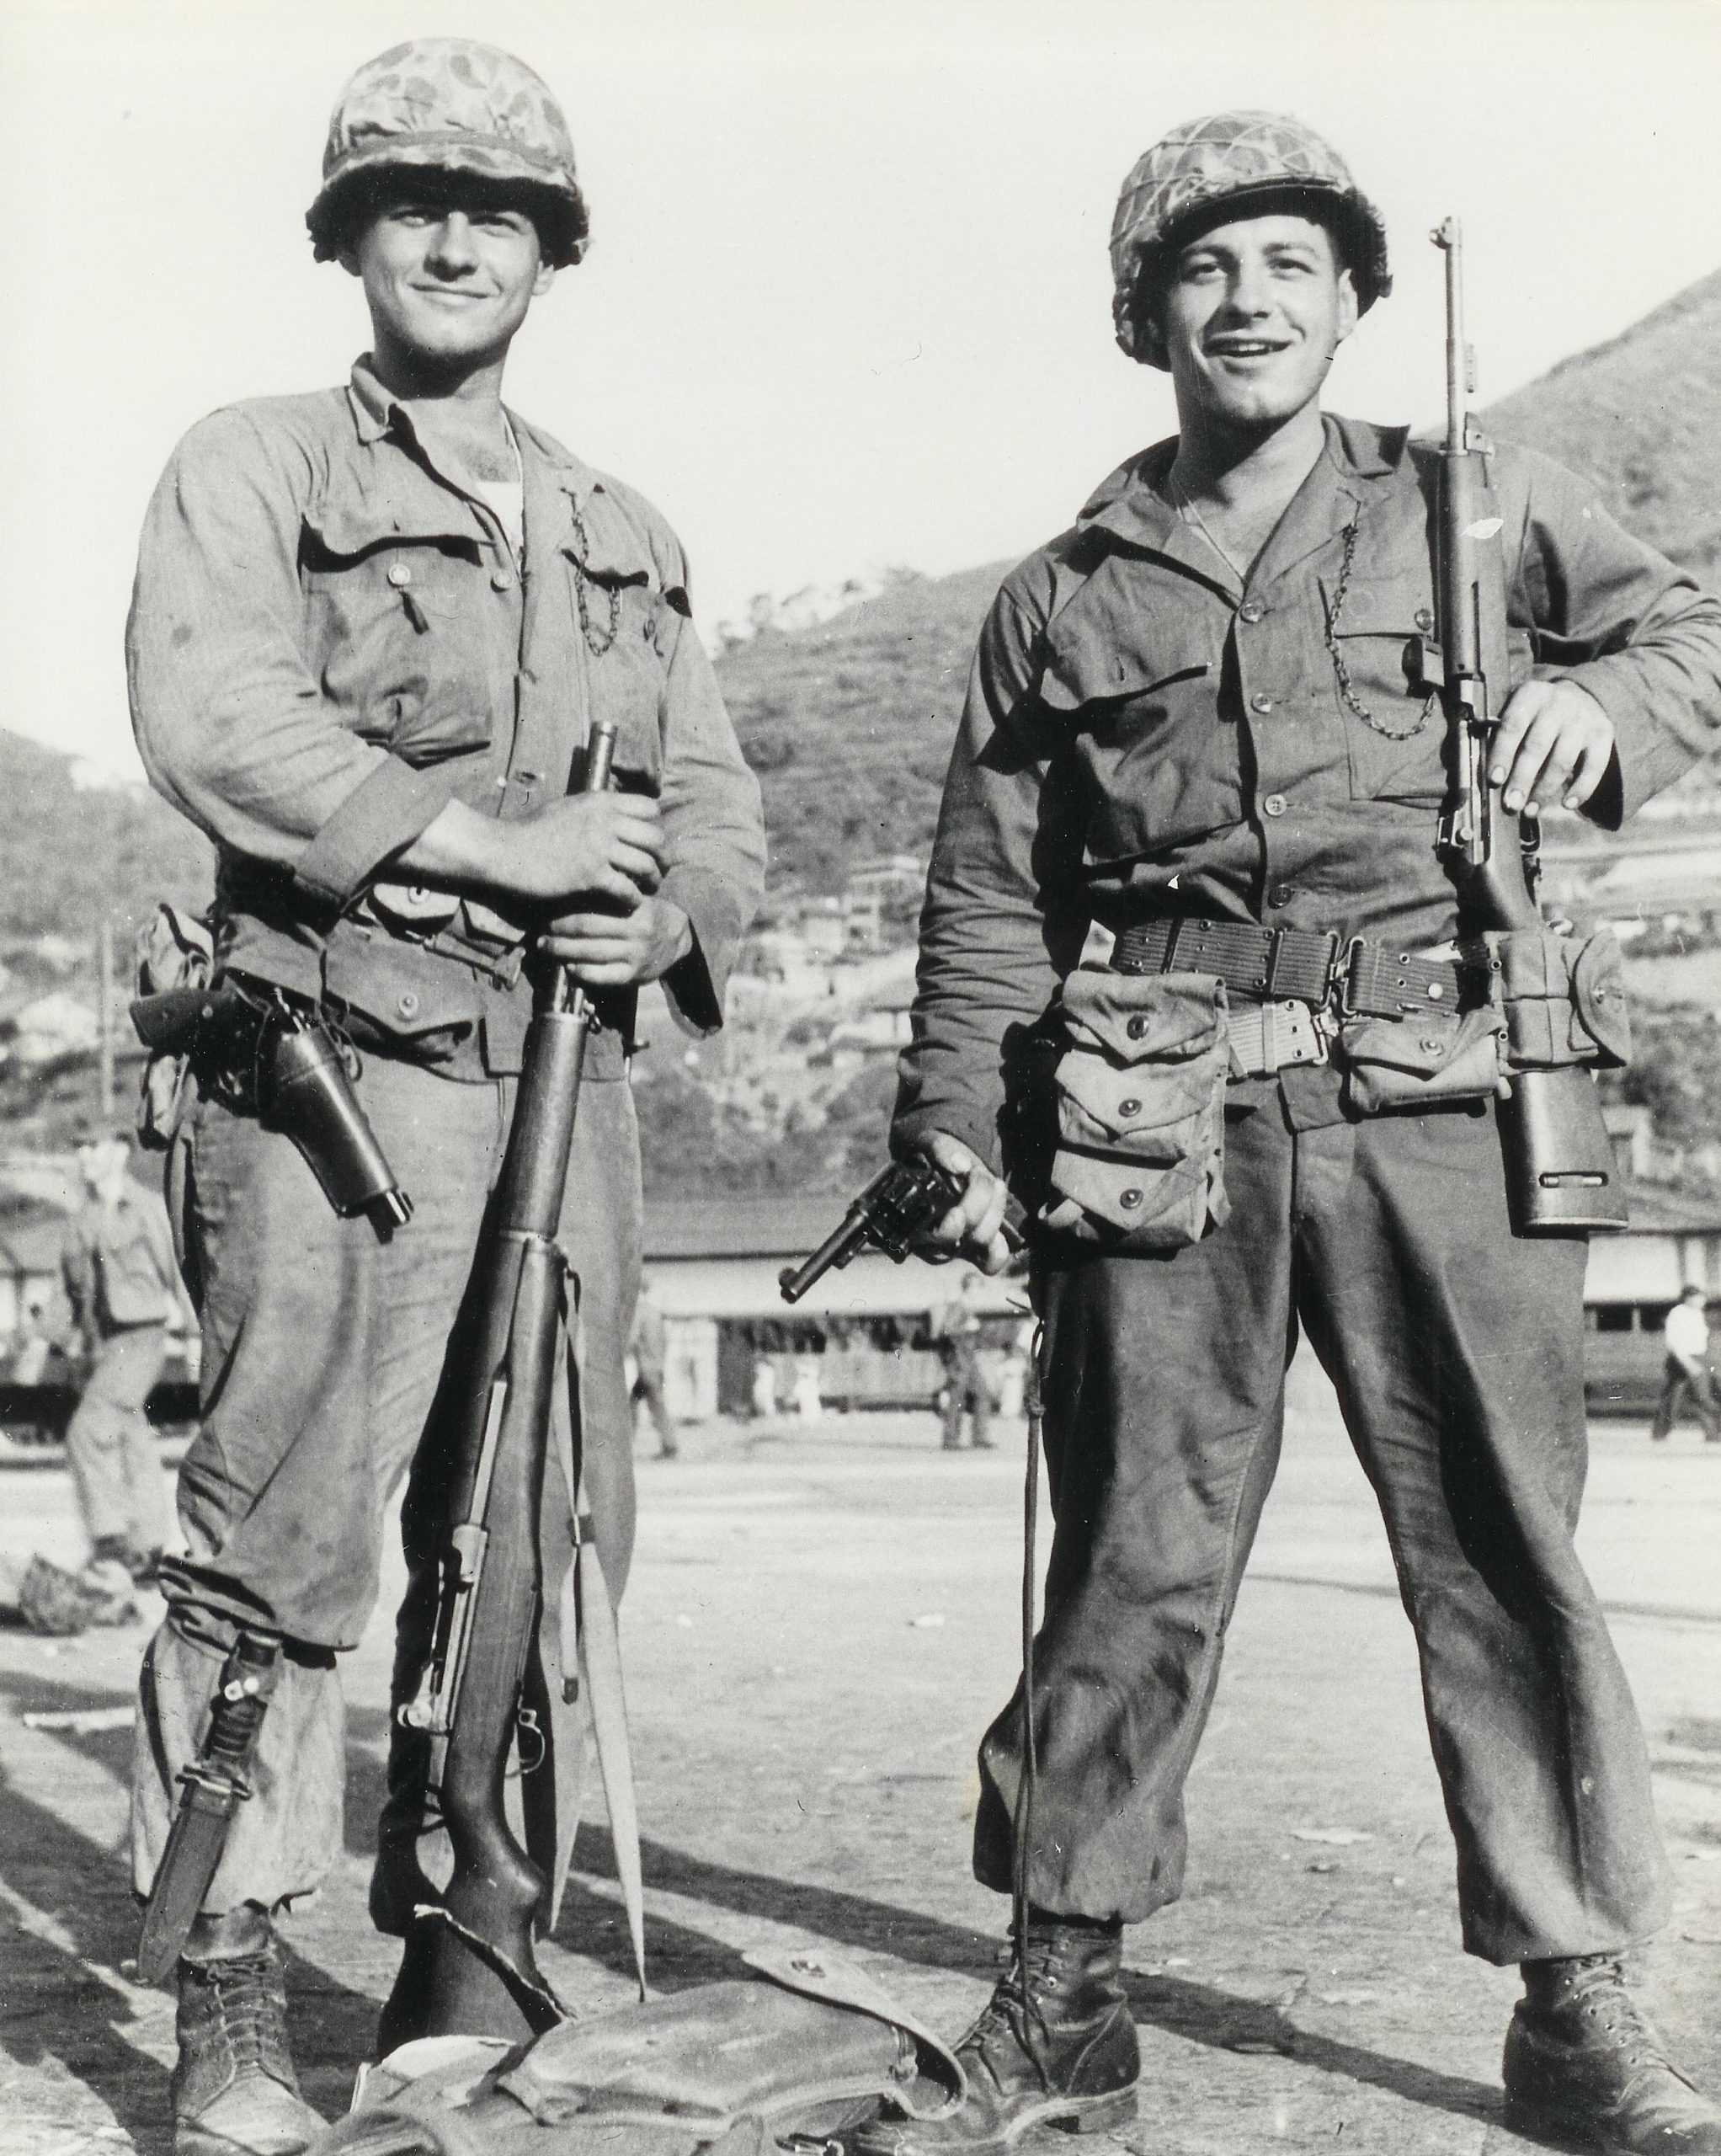 Richard and Robert Mercy at the side of a dock waiting to board ship headed to Busan. Taken on 4 July, 1950.